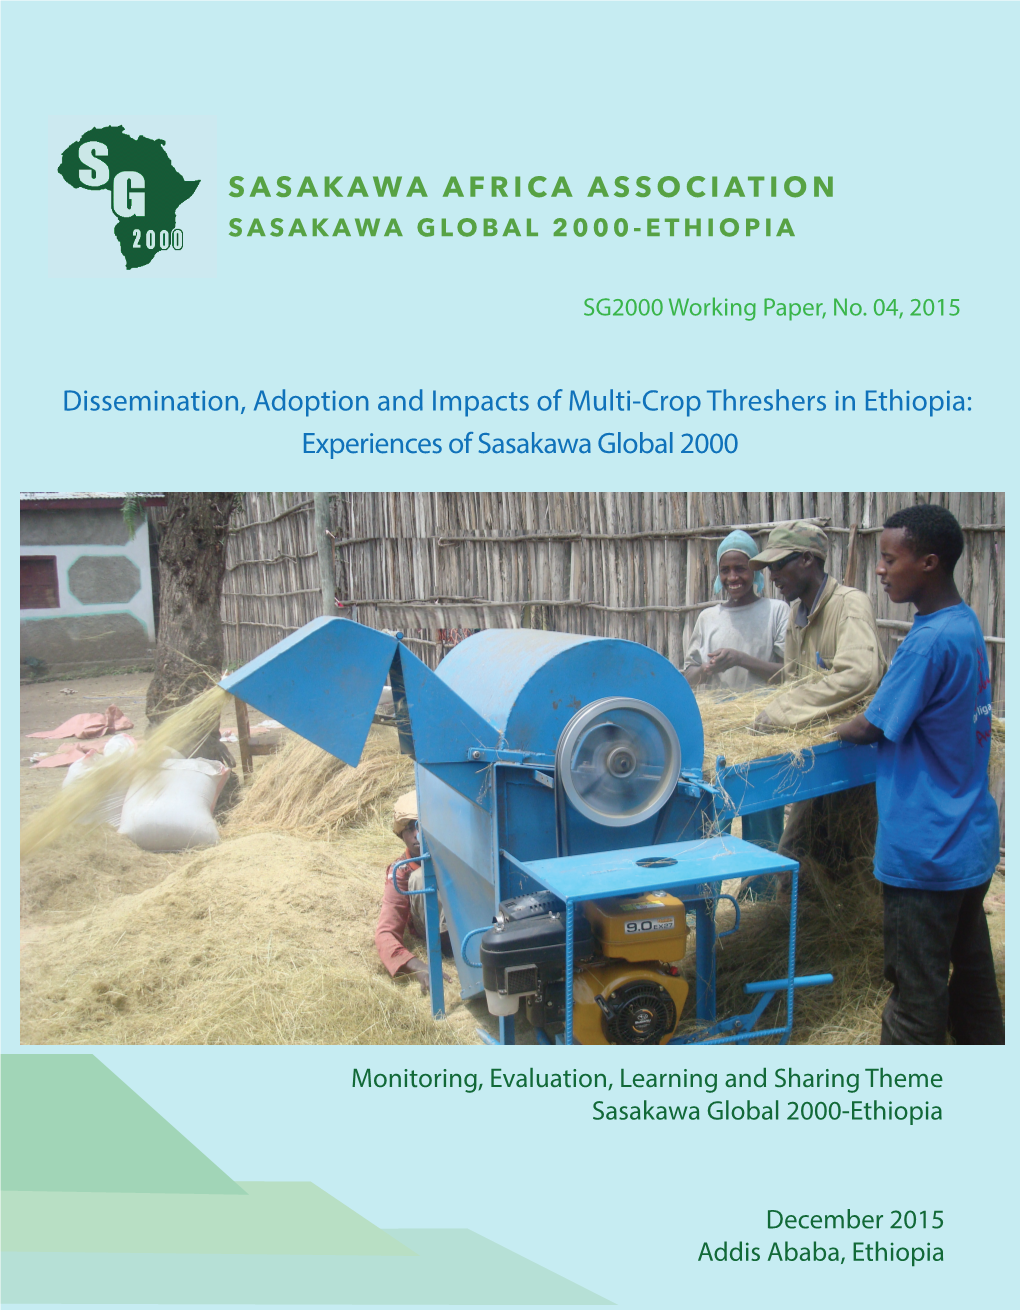 Dissemination, Adoption and Impacts of Multi-Crop Threshers in Ethiopia: Experiences of Sasakawa Global 2000